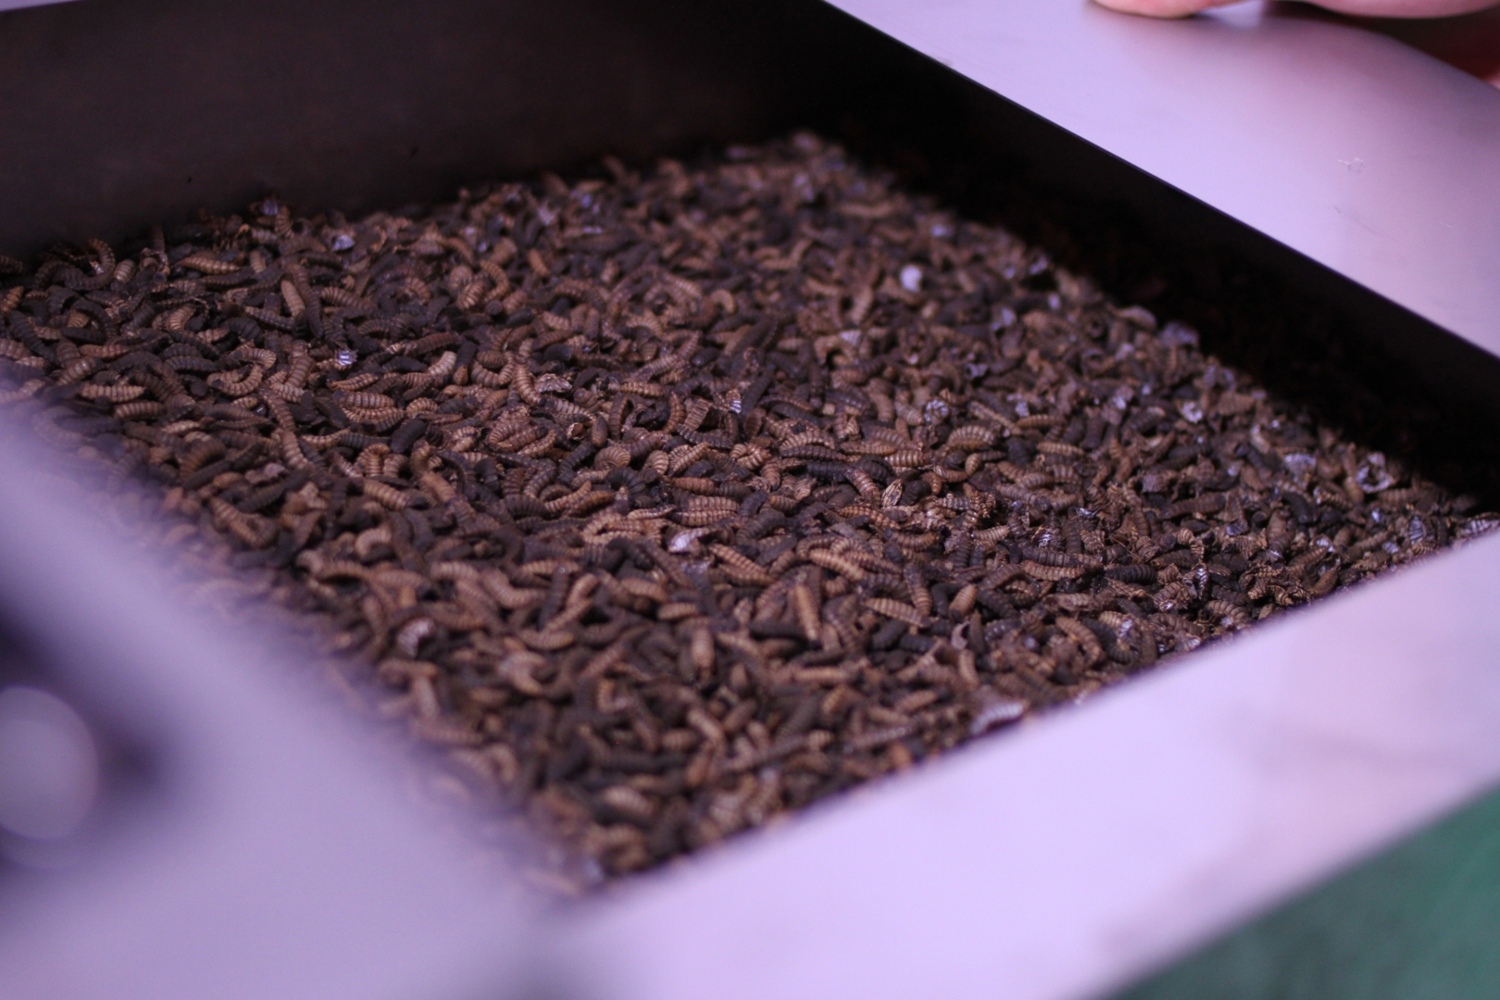 Using insects to convert food waste into sustainable animal feed – UKRI